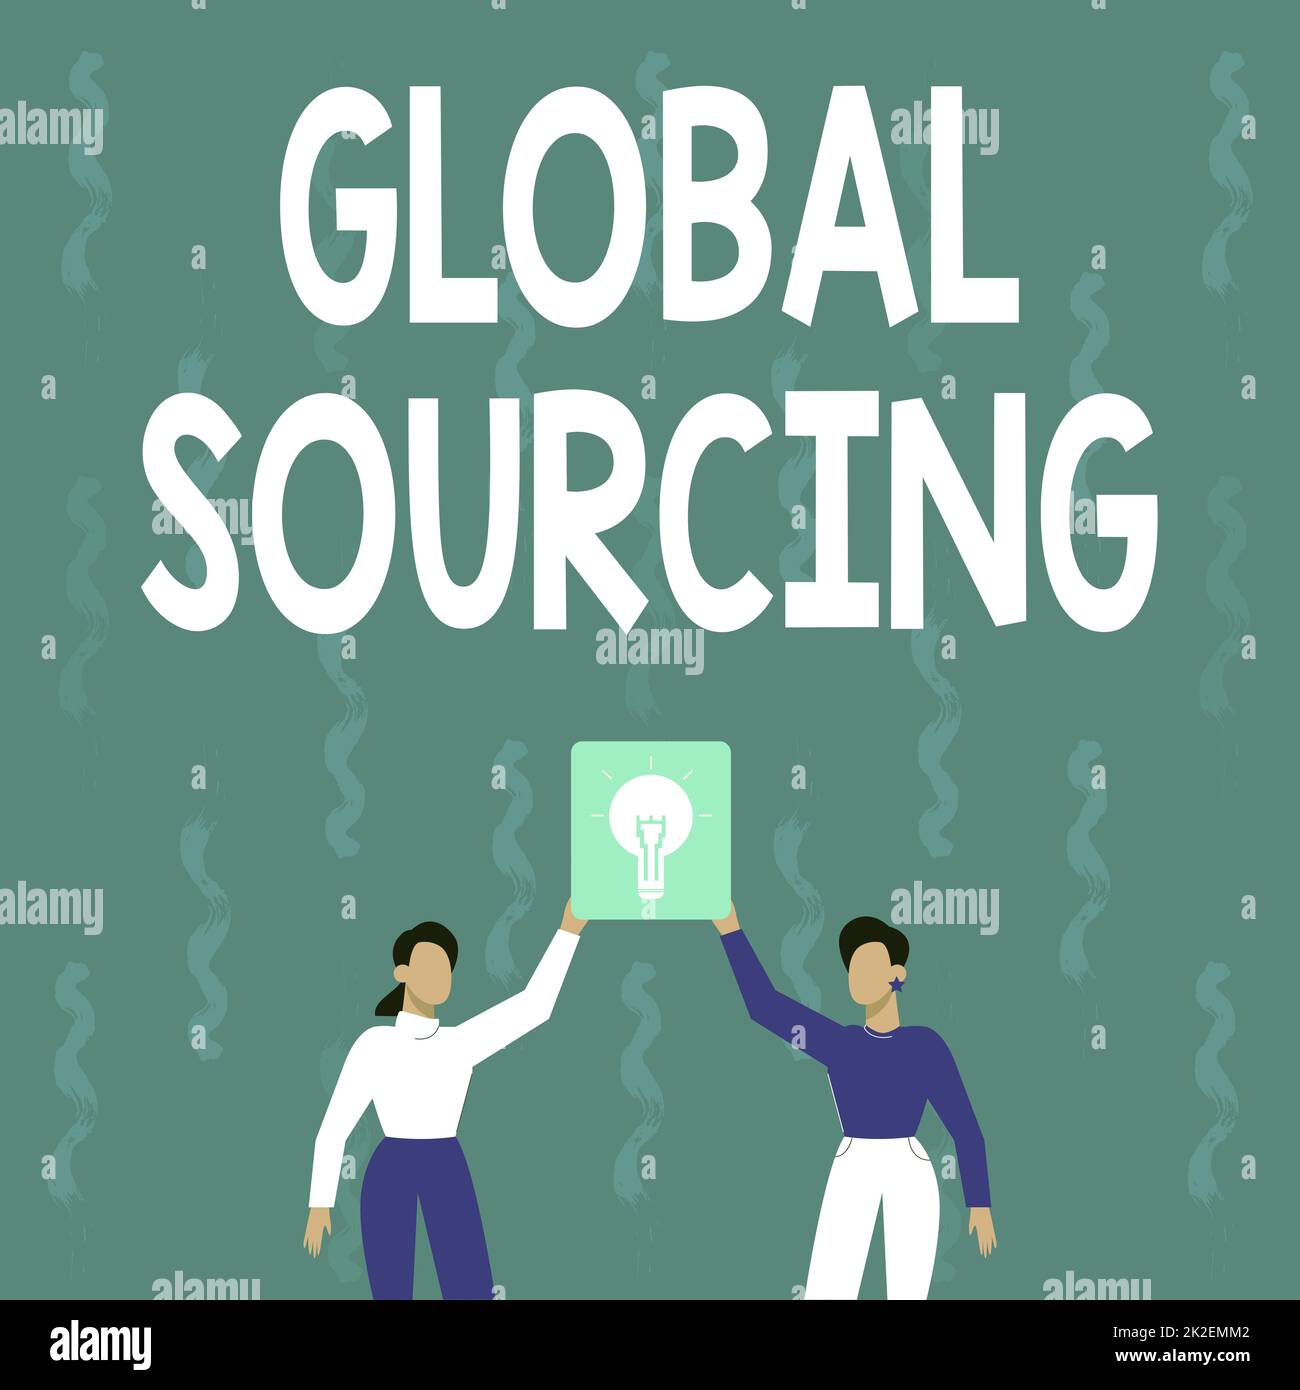 Text caption presenting Global Sourcing. Business idea practice of sourcing from the global market for goods Two Colleagues Holding Lamp Presenting New Achievement Reached. Stock Photo